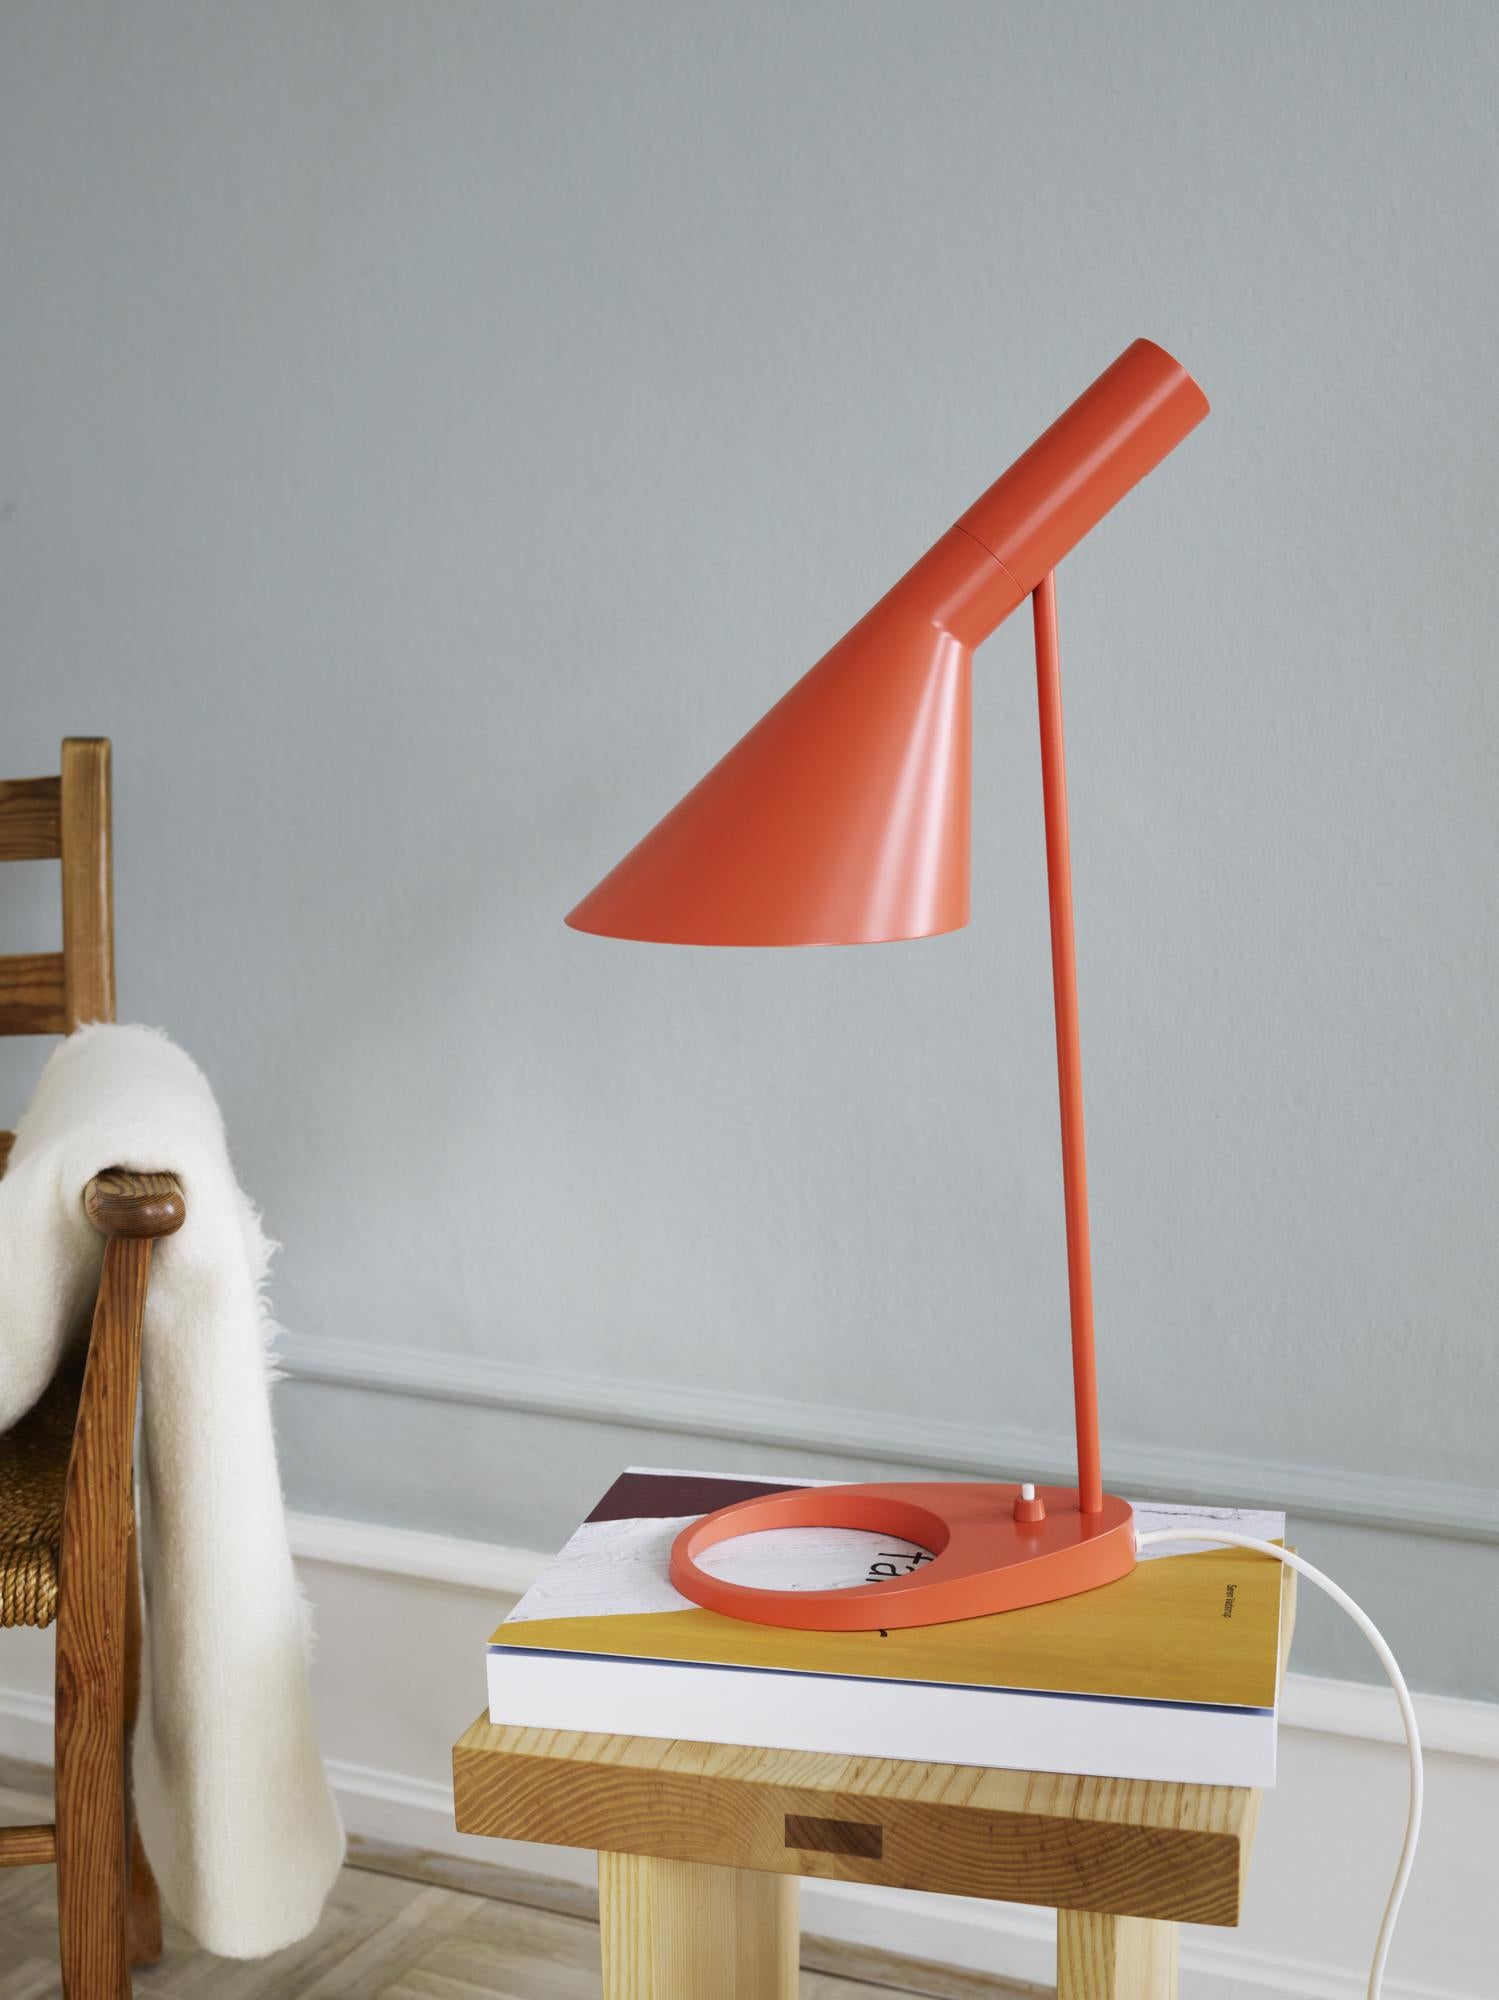 Arne Jacobsen AJ table lamp in electric orange for Louis Poulsen.

The AJ series was part of the lighting collection renowned Danish designer Arne Jacobsen created for the original SAS Royal Hotel in 1957. Today, his furniture and lighting designs